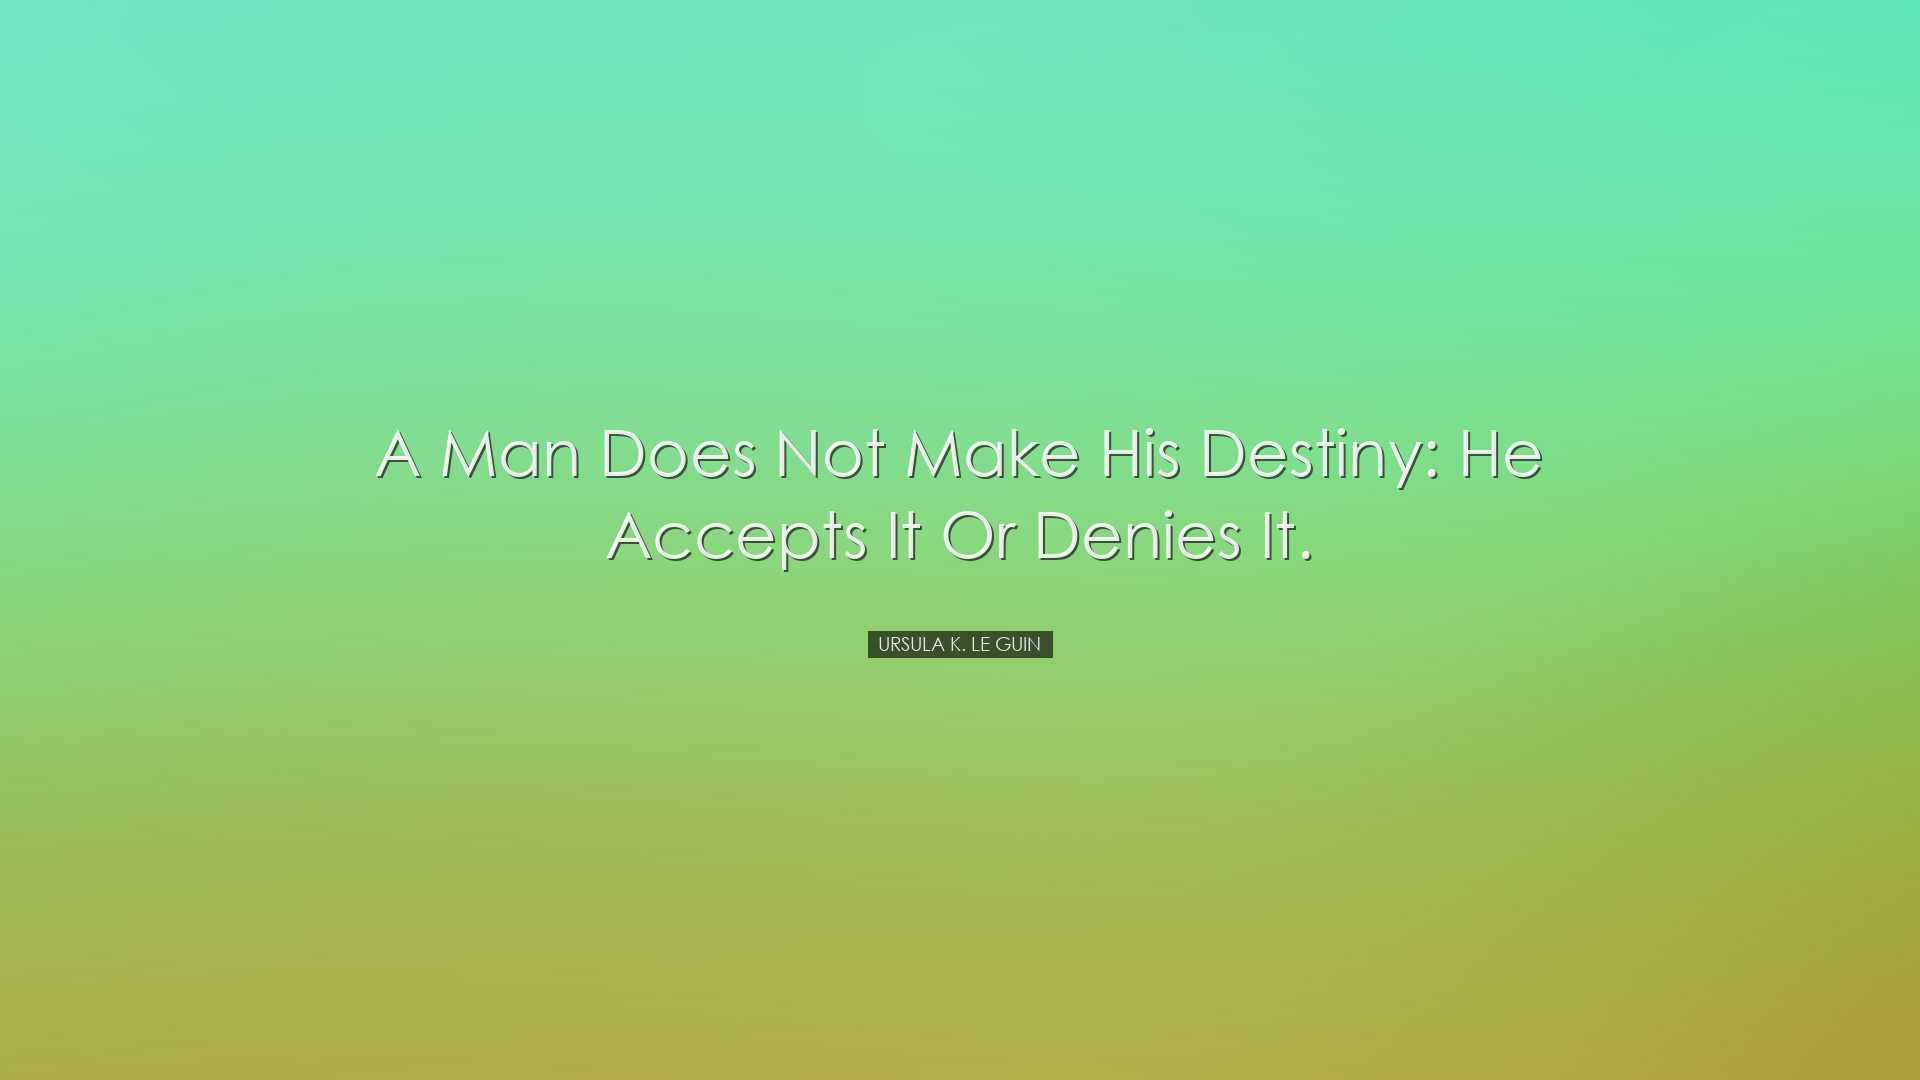 A man does not make his destiny: he accepts it or denies it. - Urs